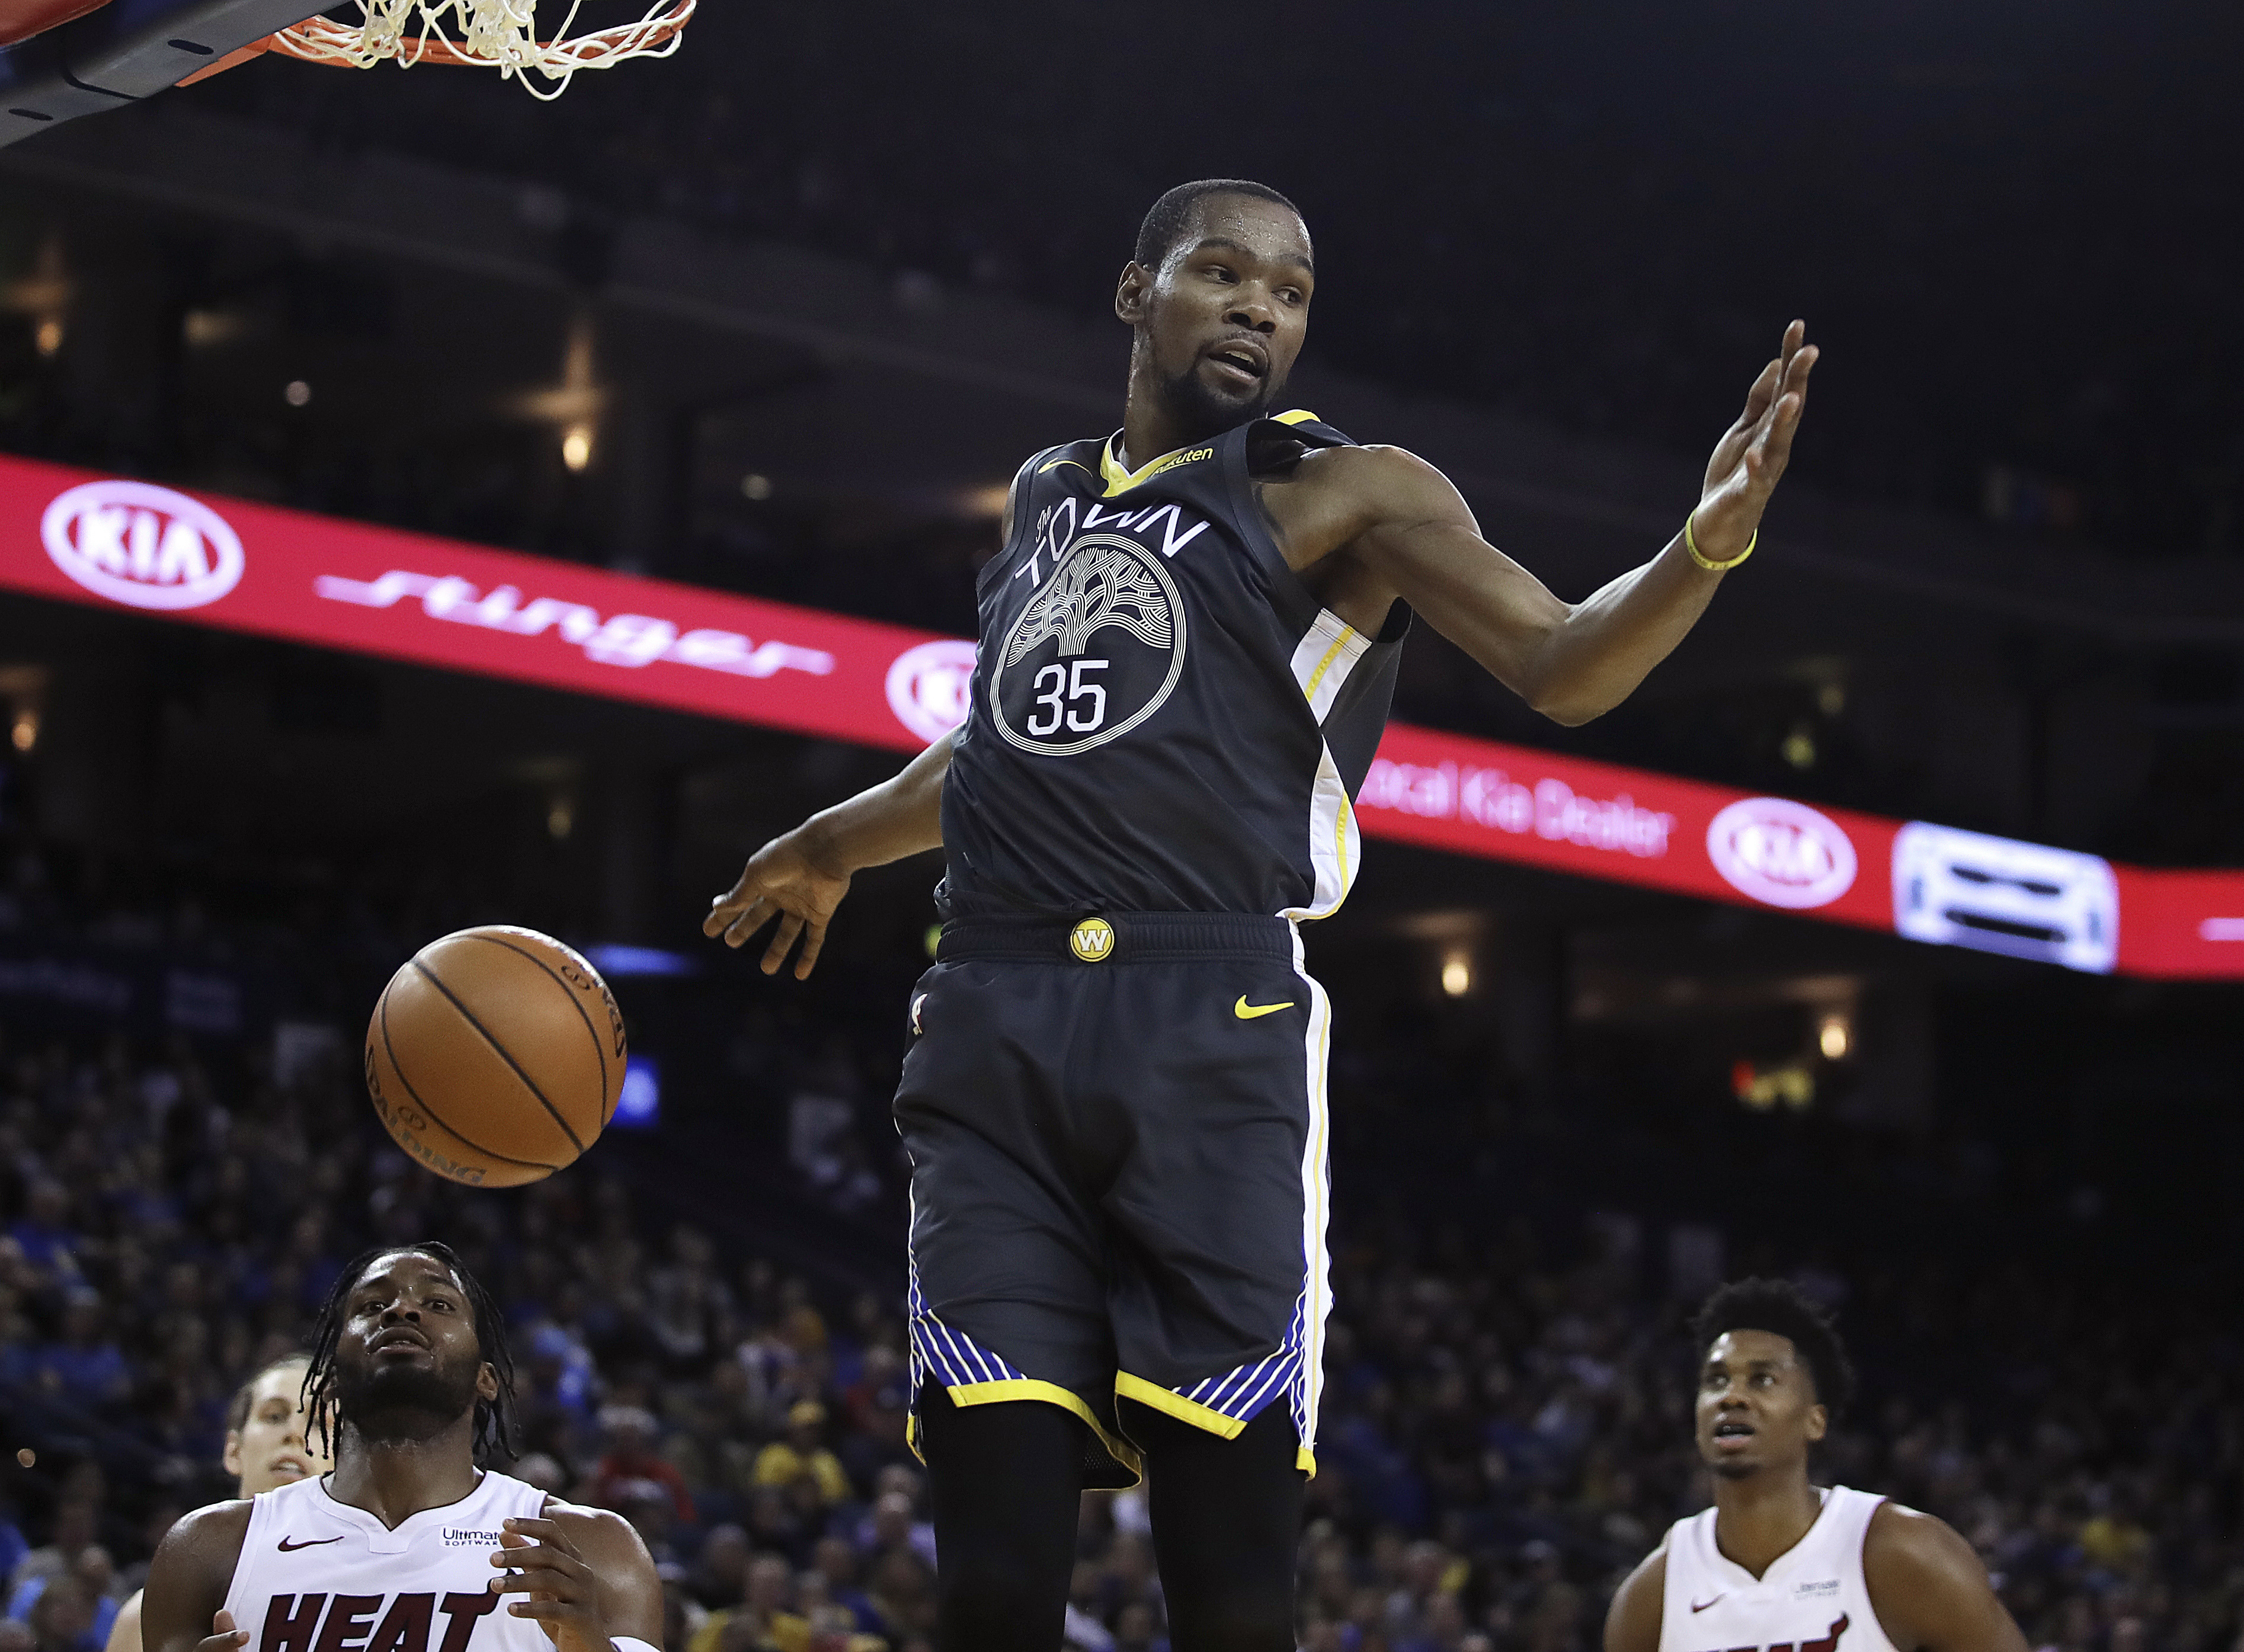 NBA says key call was missed late in Heat-Warriors game